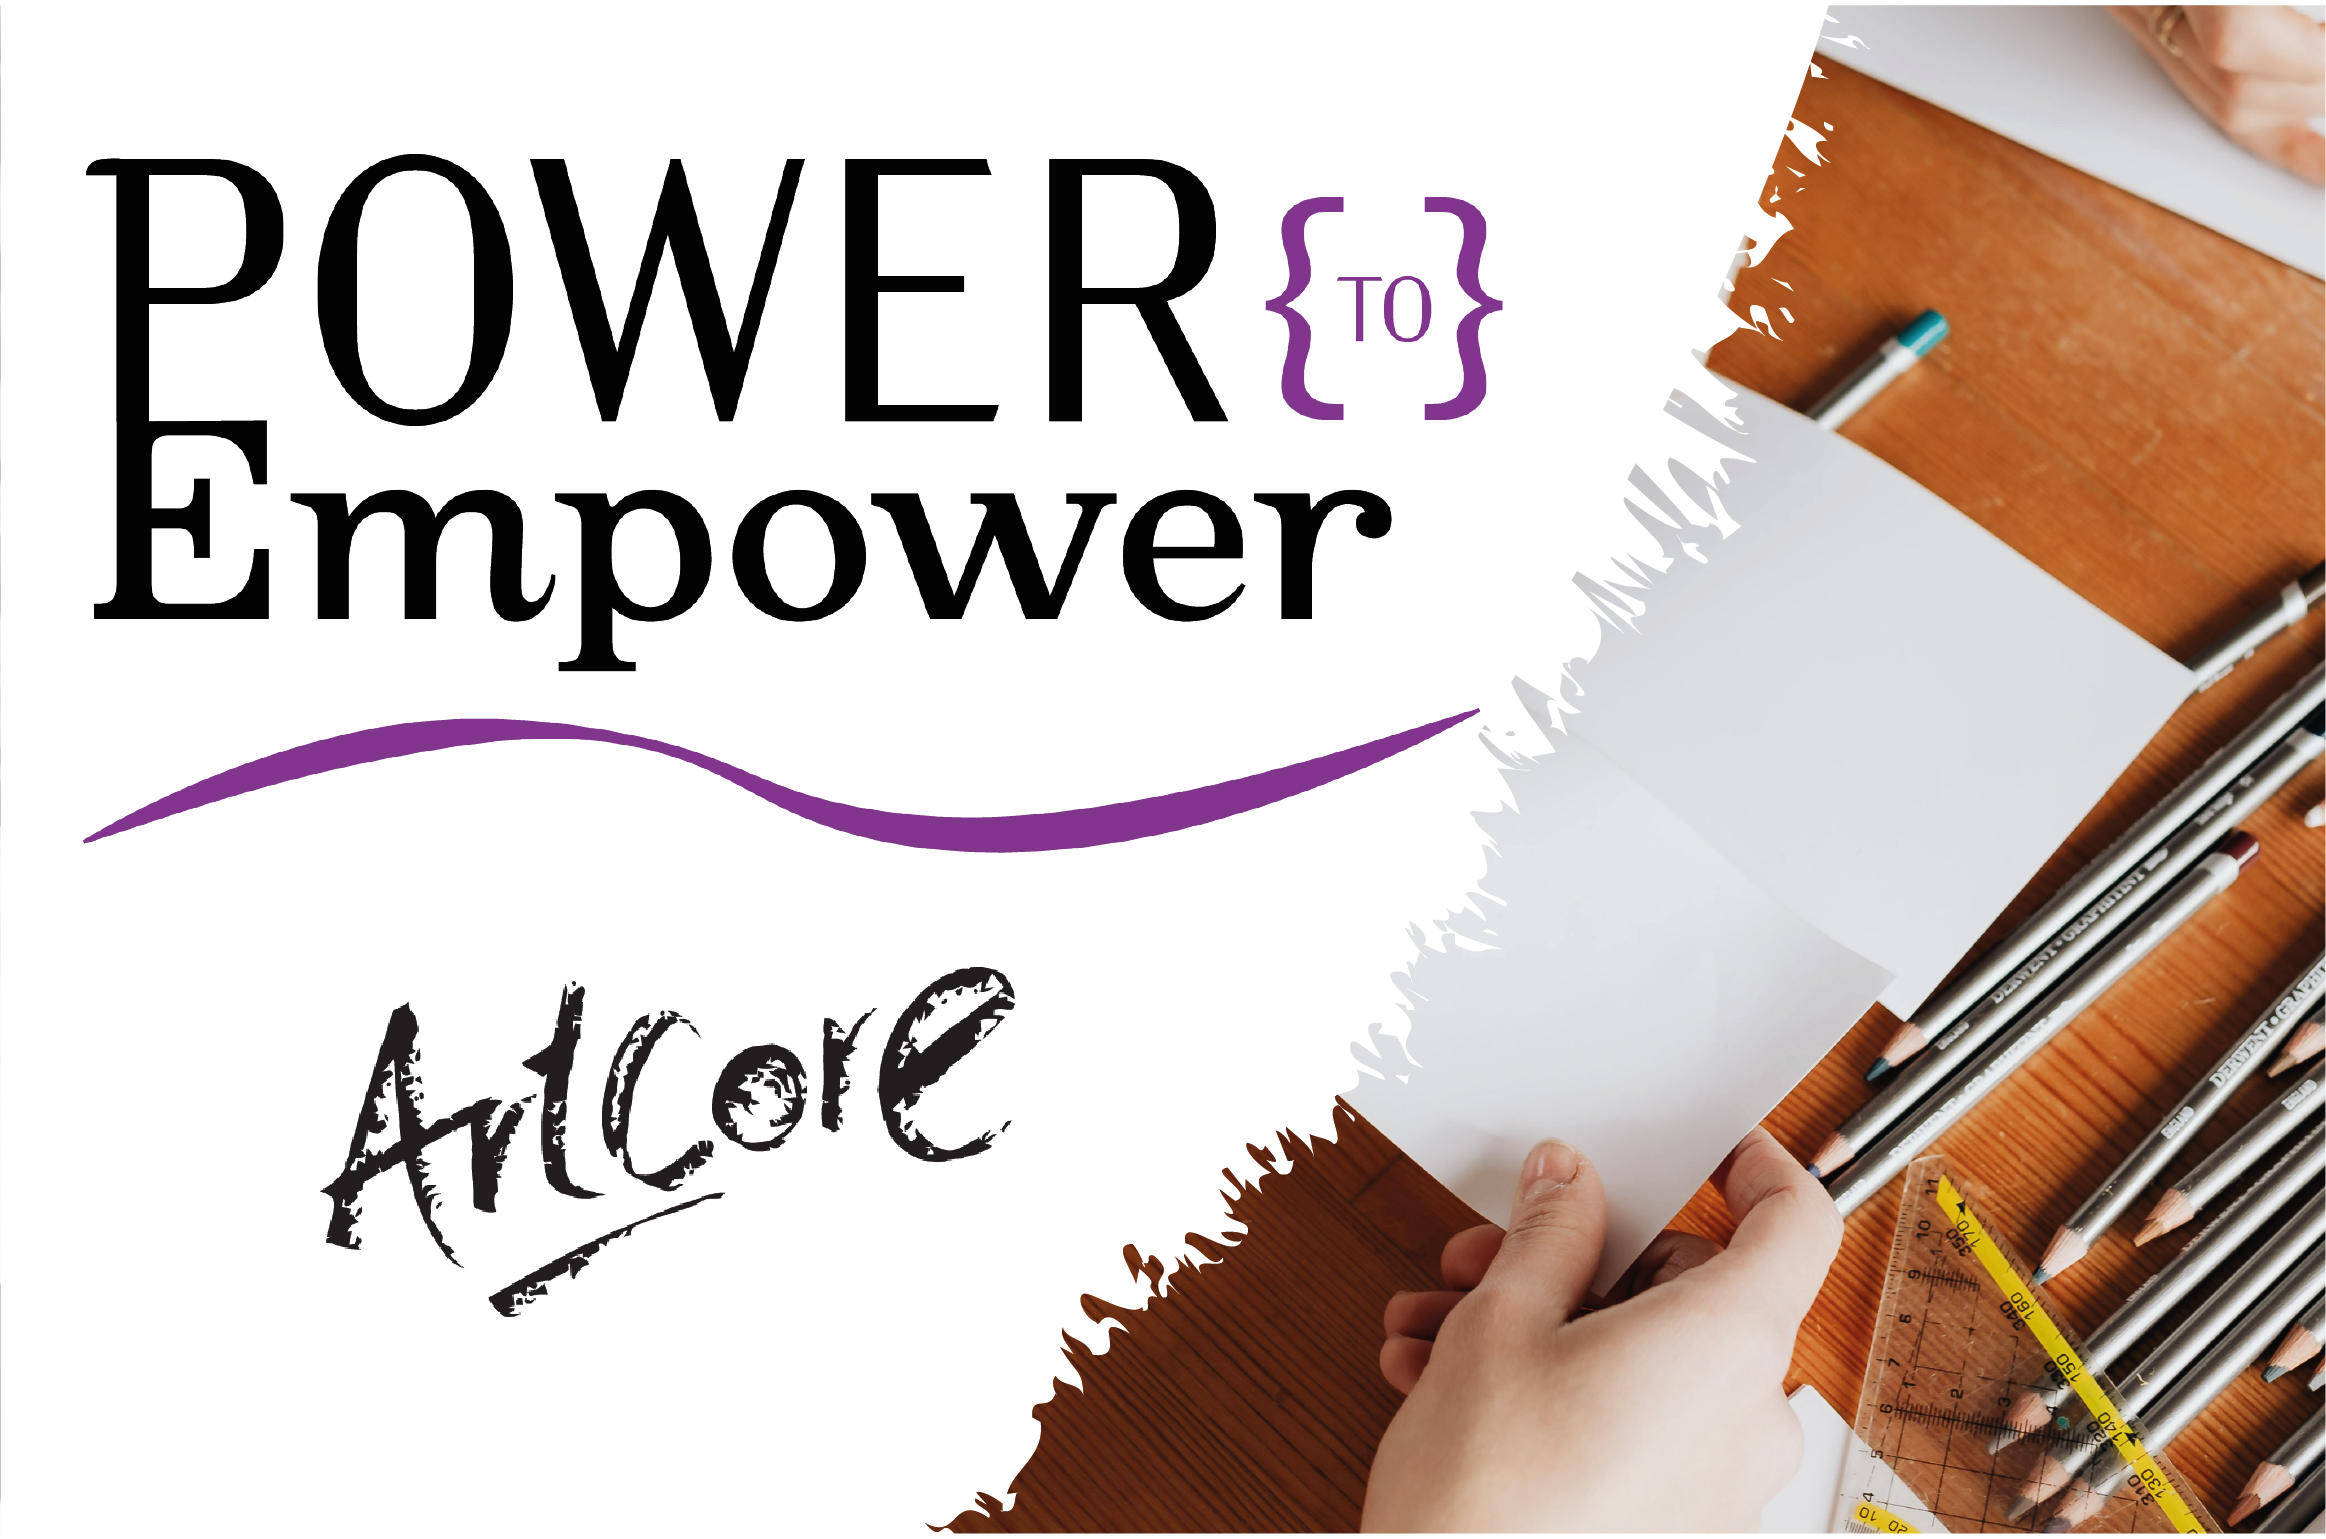 Power to Empower